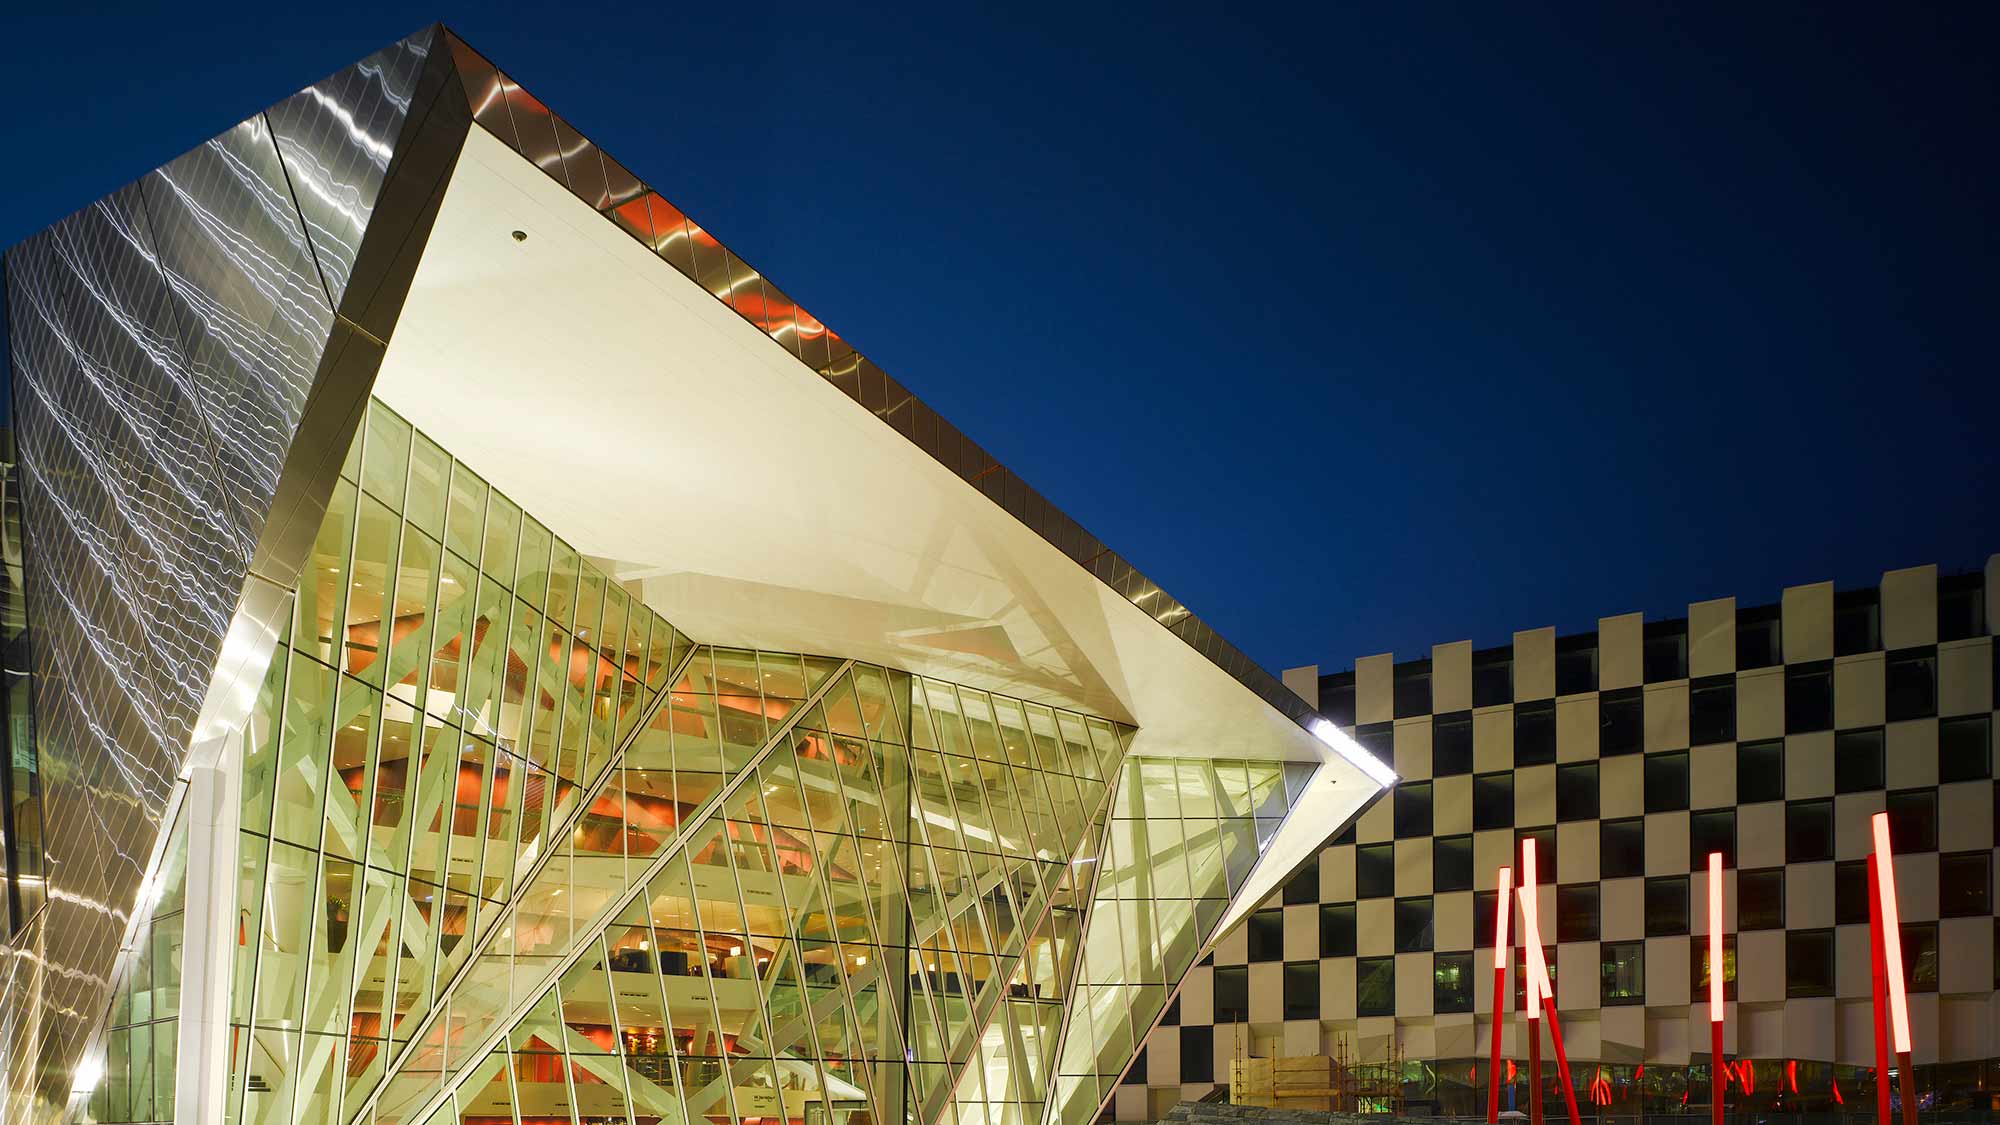 Exterior shot of the Bord Gáis Energy Theatre at night time.